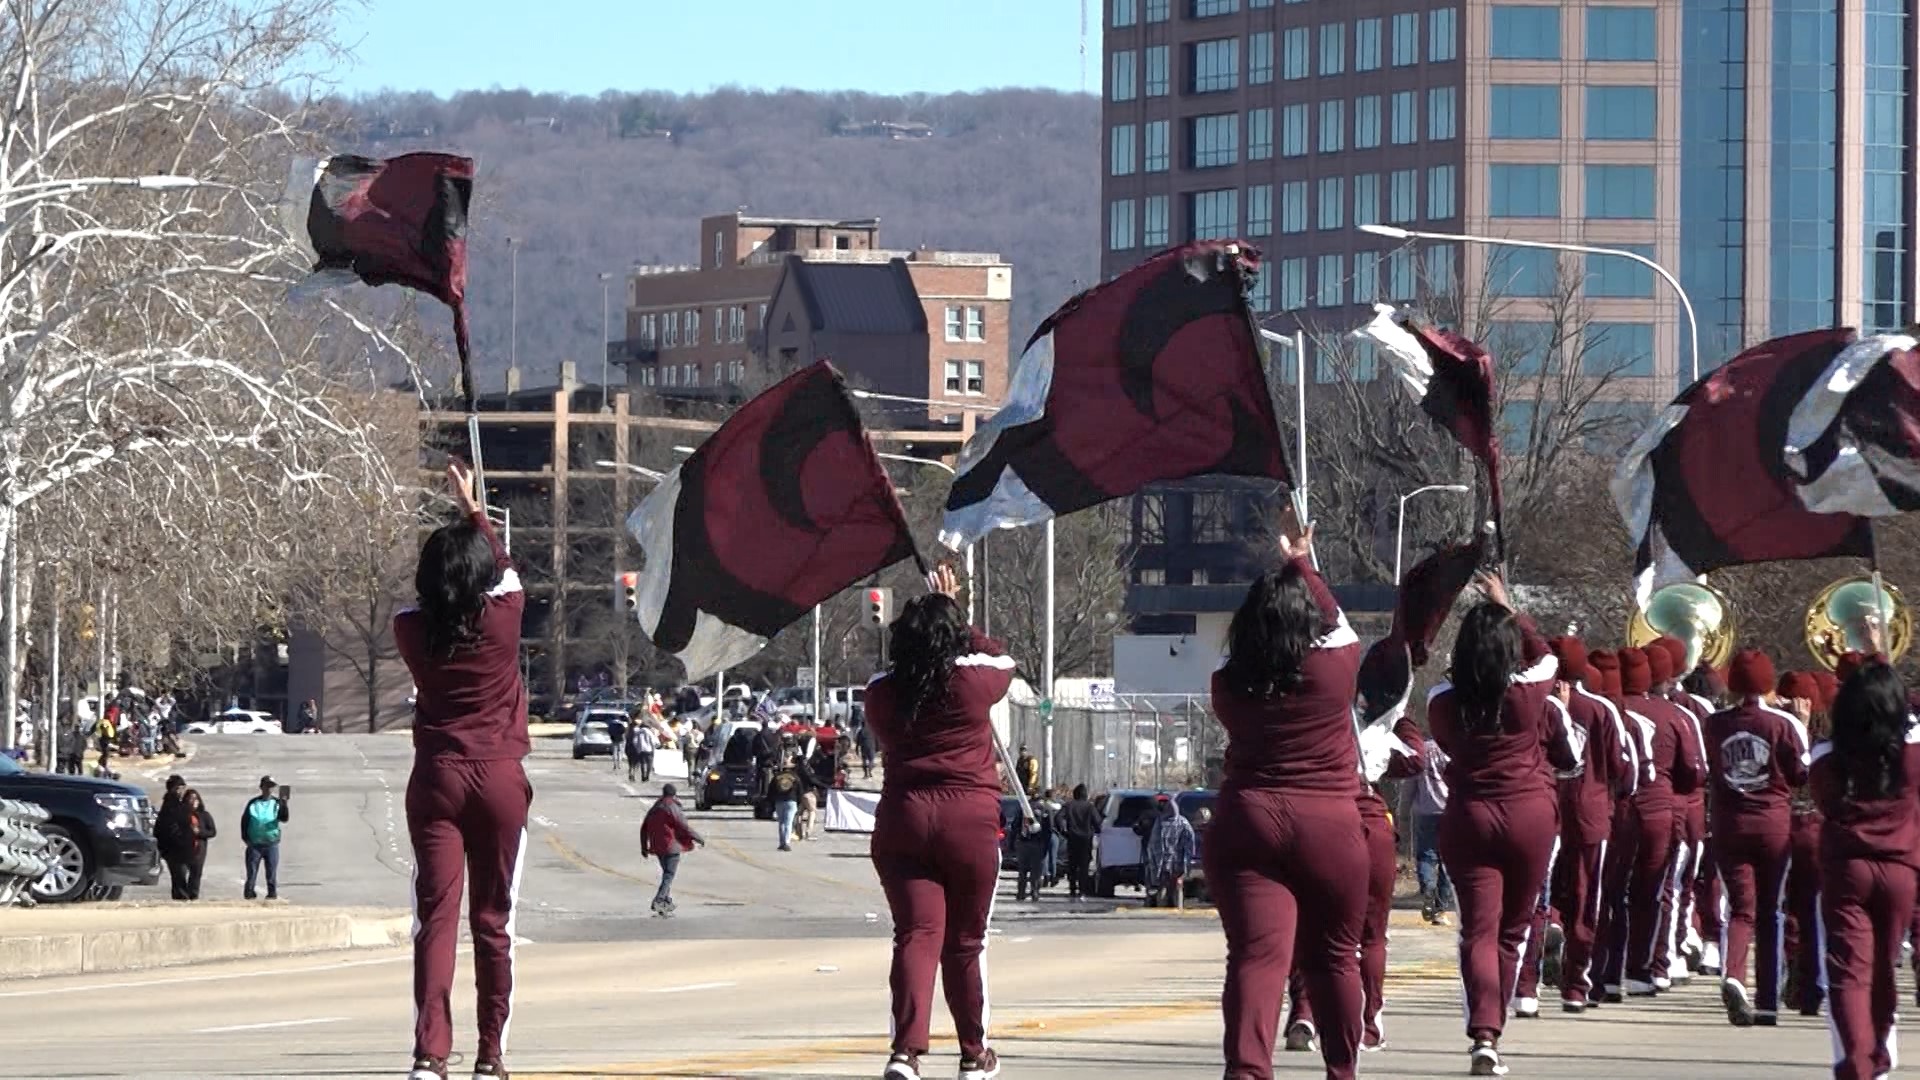 Alpha Phi Alpha Fraternity, Inc. helped host a celebratory Martin Luther King Jr. parade for the community.